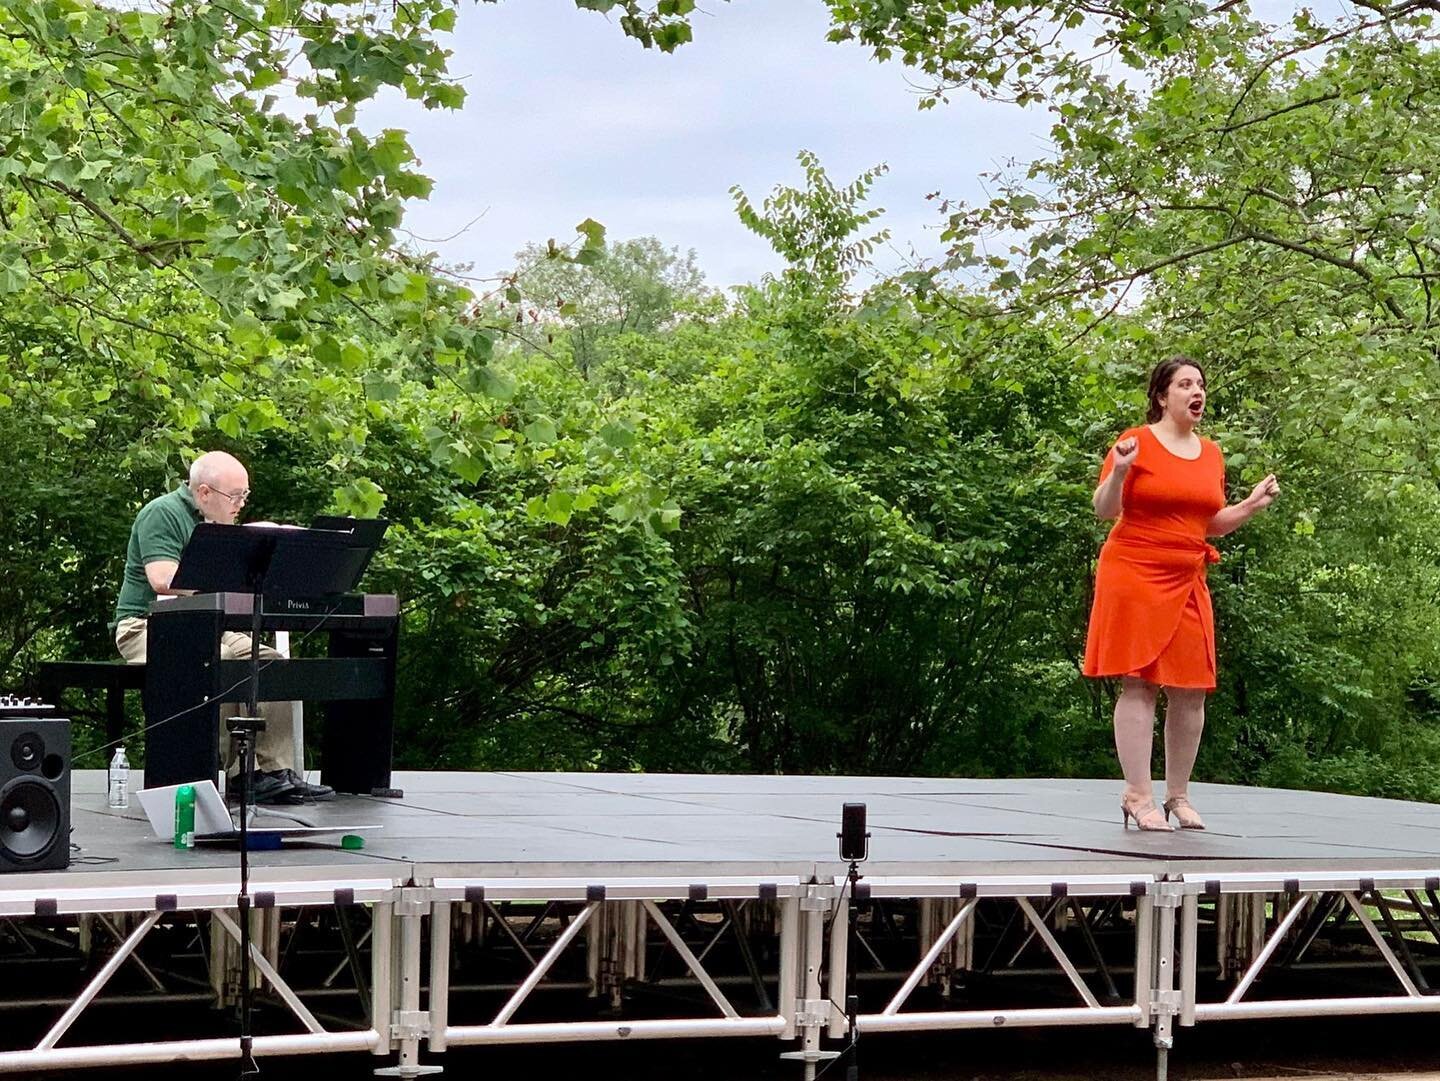 It was a beautiful evening of community and music at last night&rsquo;s benefit recital with @redivivusopera! 

THANK YOU to all who showed up and contributed to meet neighbors&rsquo; needs. And a special thank you to Redivivus Opera for hosting thei